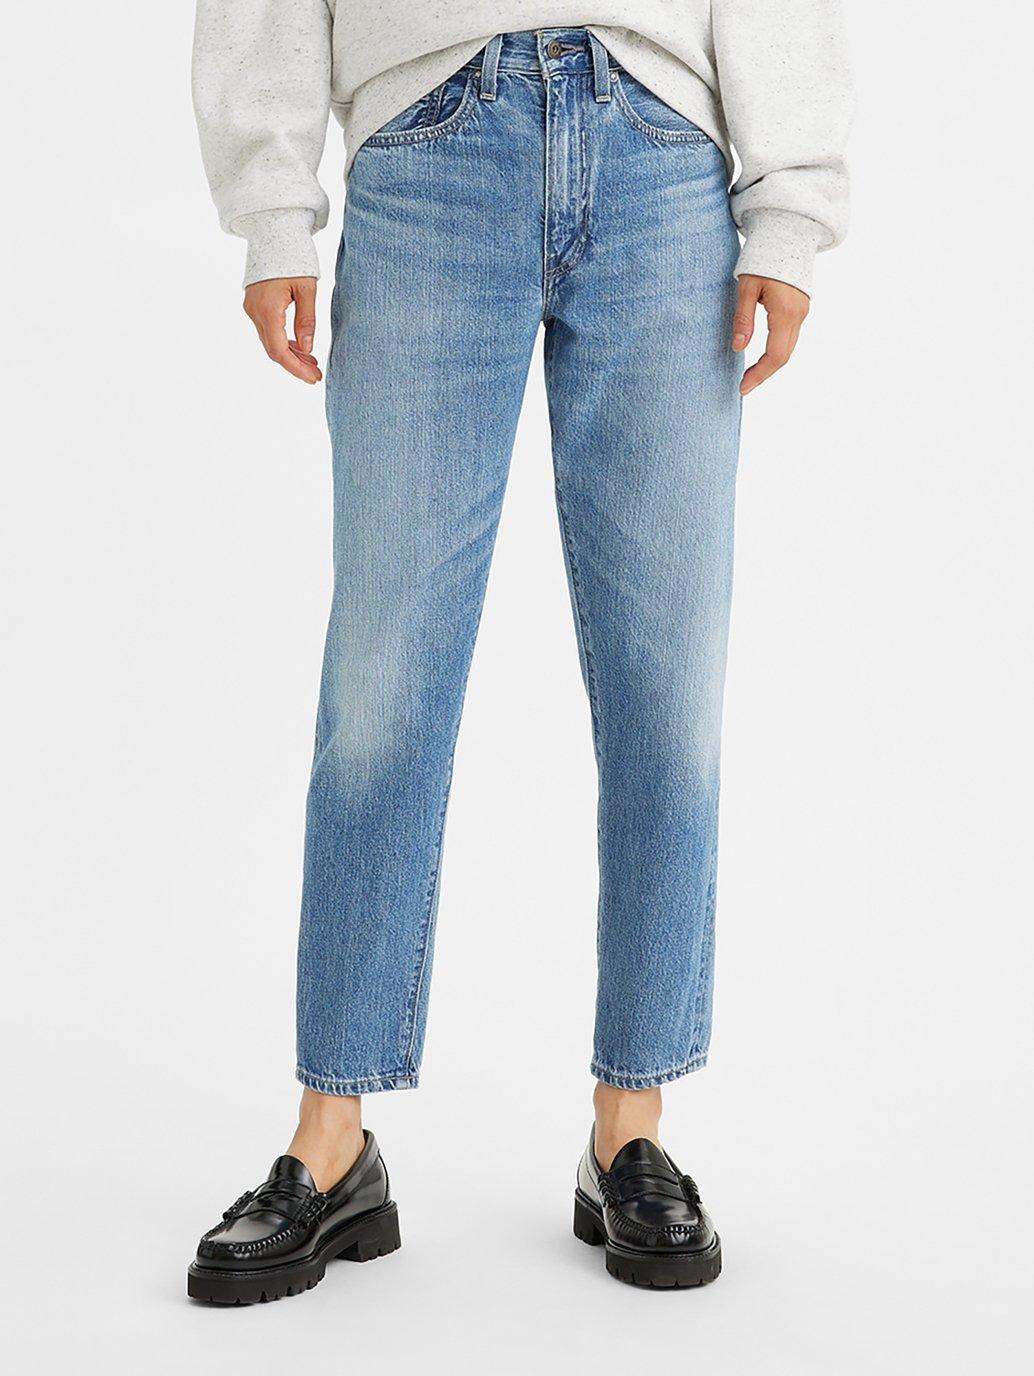 Buy Levi's® Made & Crafted® Women's High-Rise Boyfriend Jeans